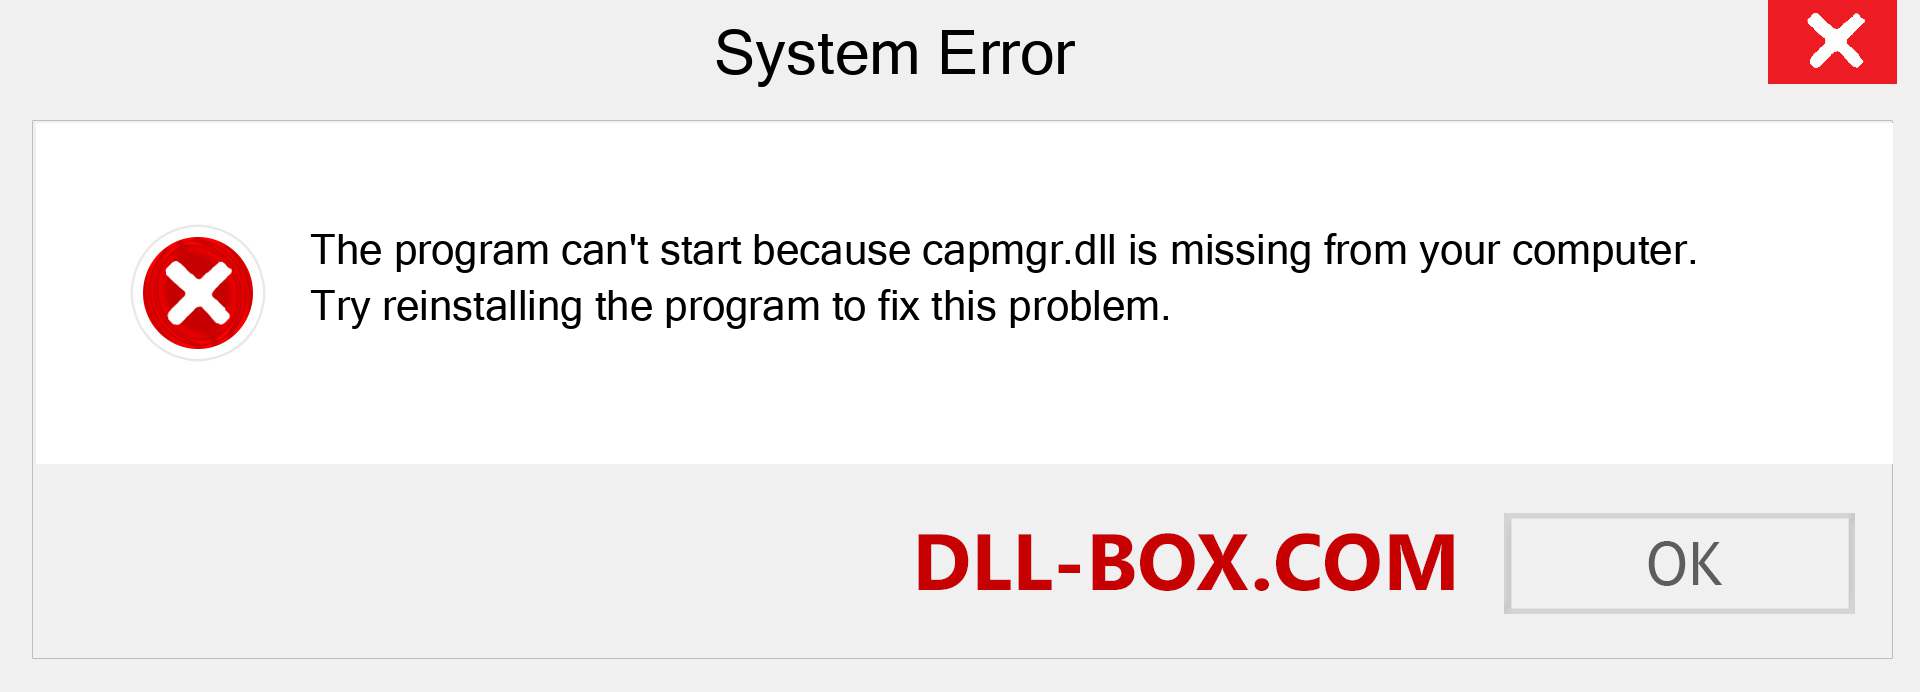  capmgr.dll file is missing?. Download for Windows 7, 8, 10 - Fix  capmgr dll Missing Error on Windows, photos, images